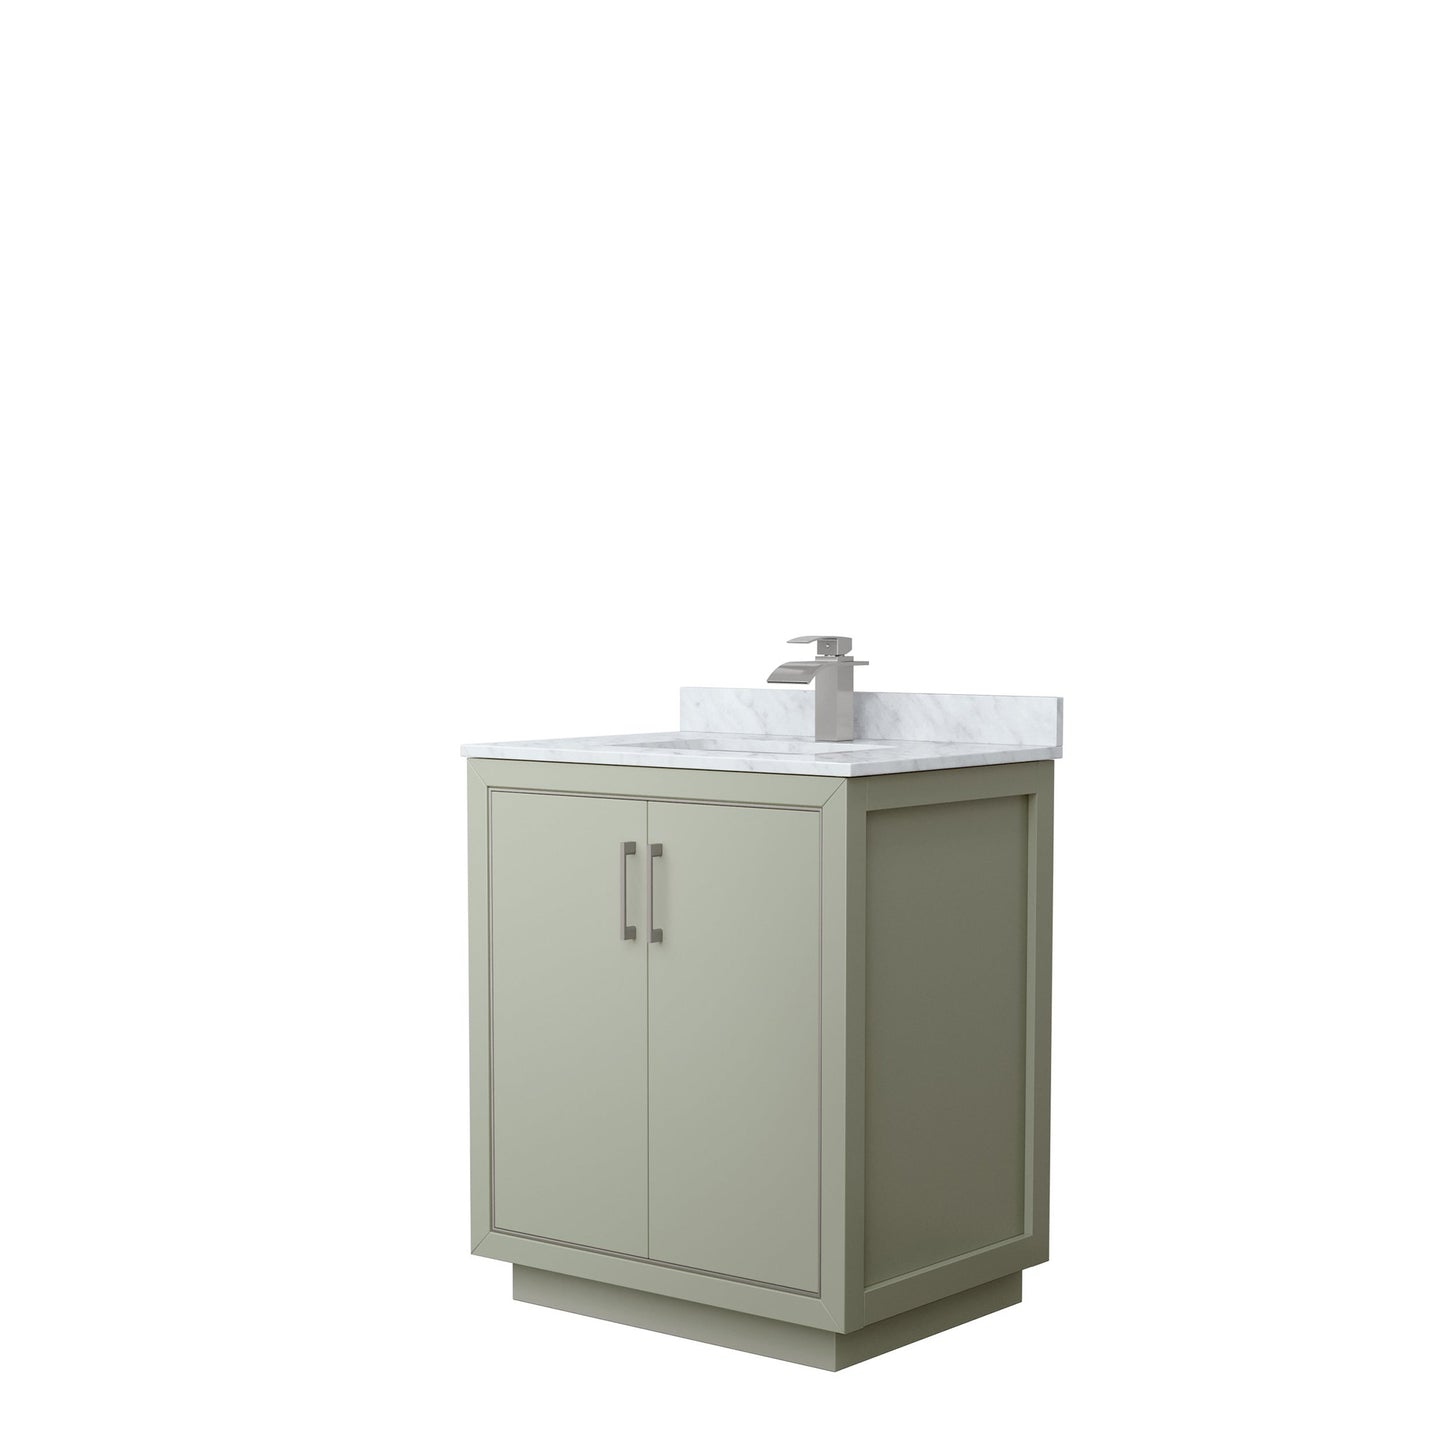 Wyndham Collection Icon 30" Single Bathroom Vanity in Light Green, White Carrara Marble Countertop, Undermount Square Sink, Brushed Nickel Trim